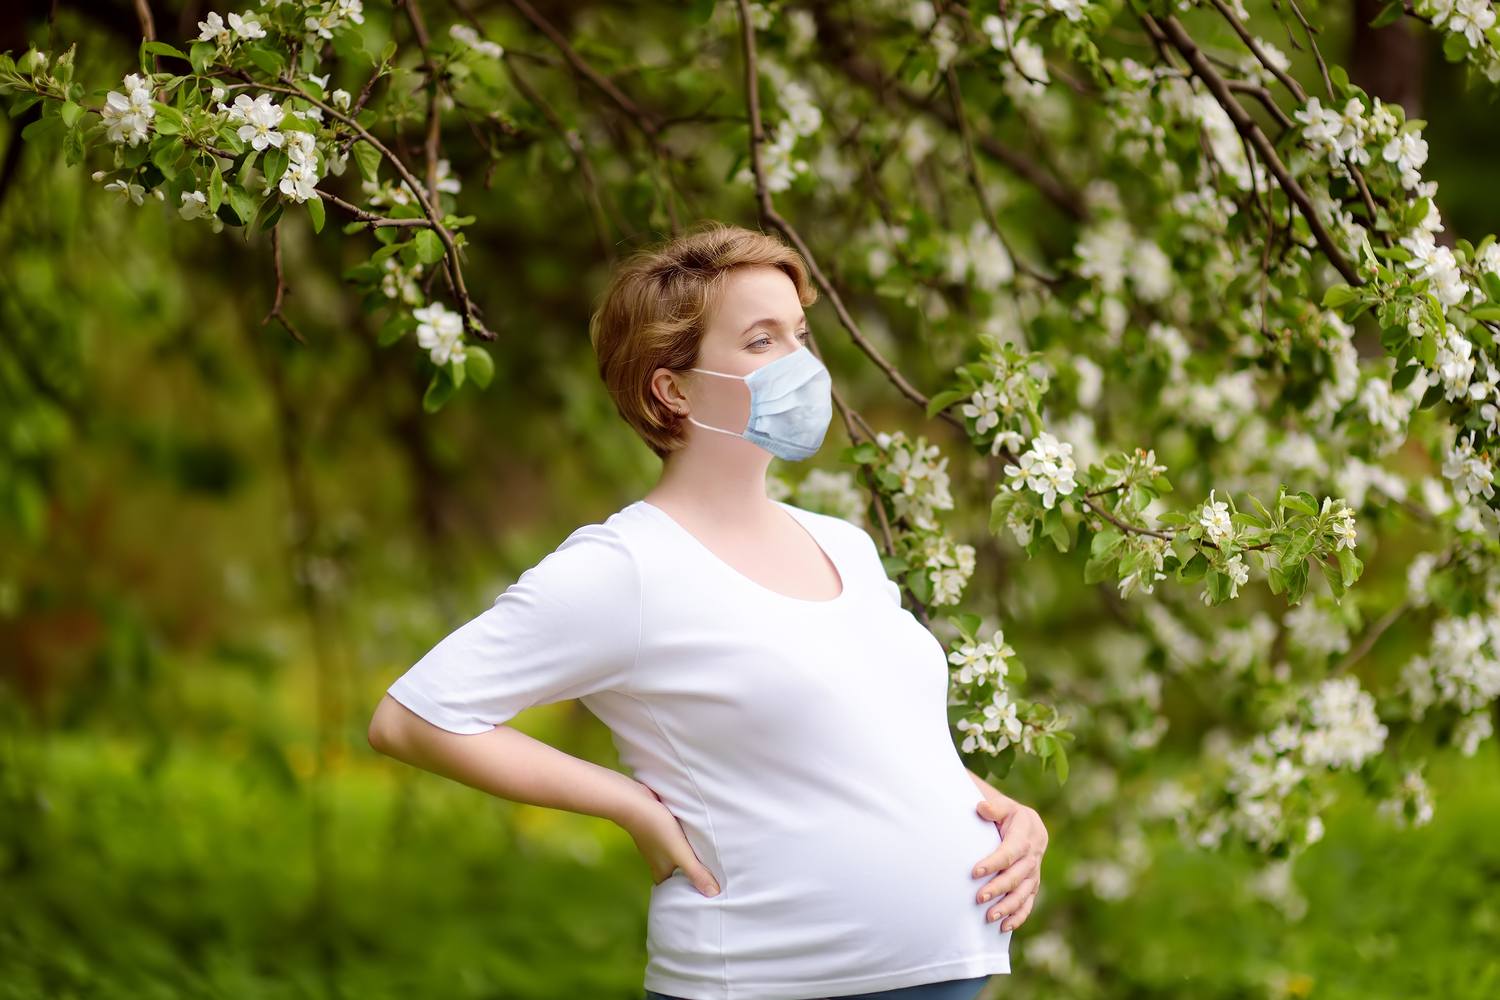 How to Deal With Sneezing During Pregnancy